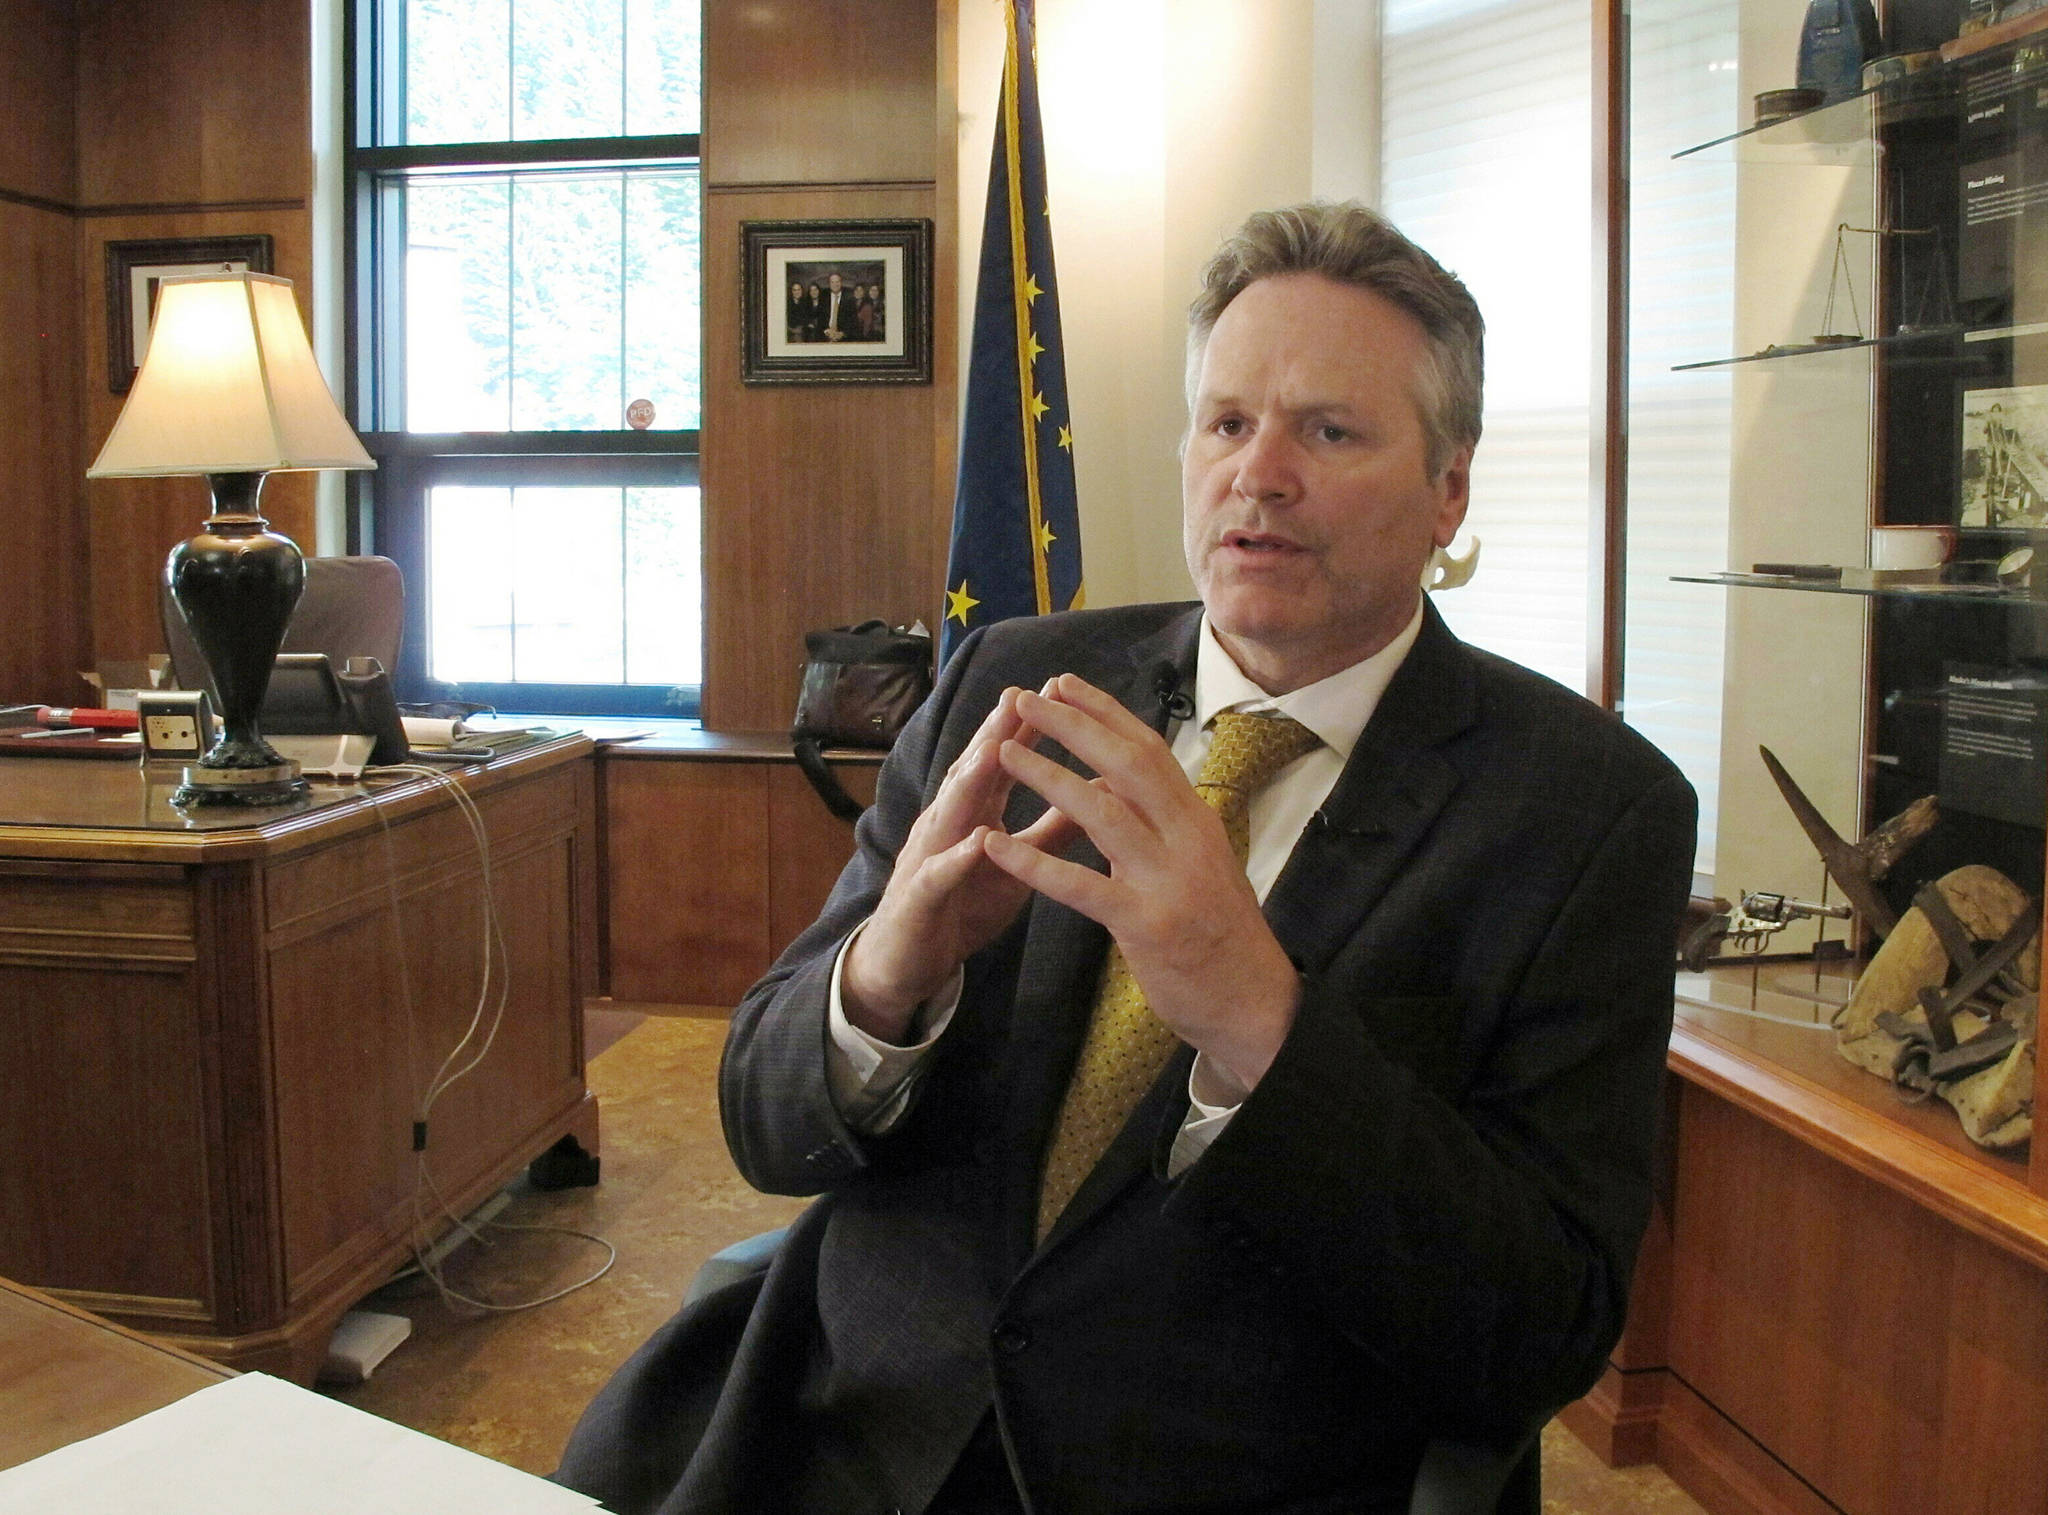 In this May 29 file photo, Alaska Gov. Mike Dunleavy speaks to reporters in his office at the state Capitol in Juneau, Alaska. Dunleavy said he hopes to move past the rancor of his first year in office, amid an unsettled dispute with lawmakers over state spending and threat of a recall effort looming large. The Republican will mark a full year in office Tuesday, Dec. 3. (AP Photo | Becky Bohrer)